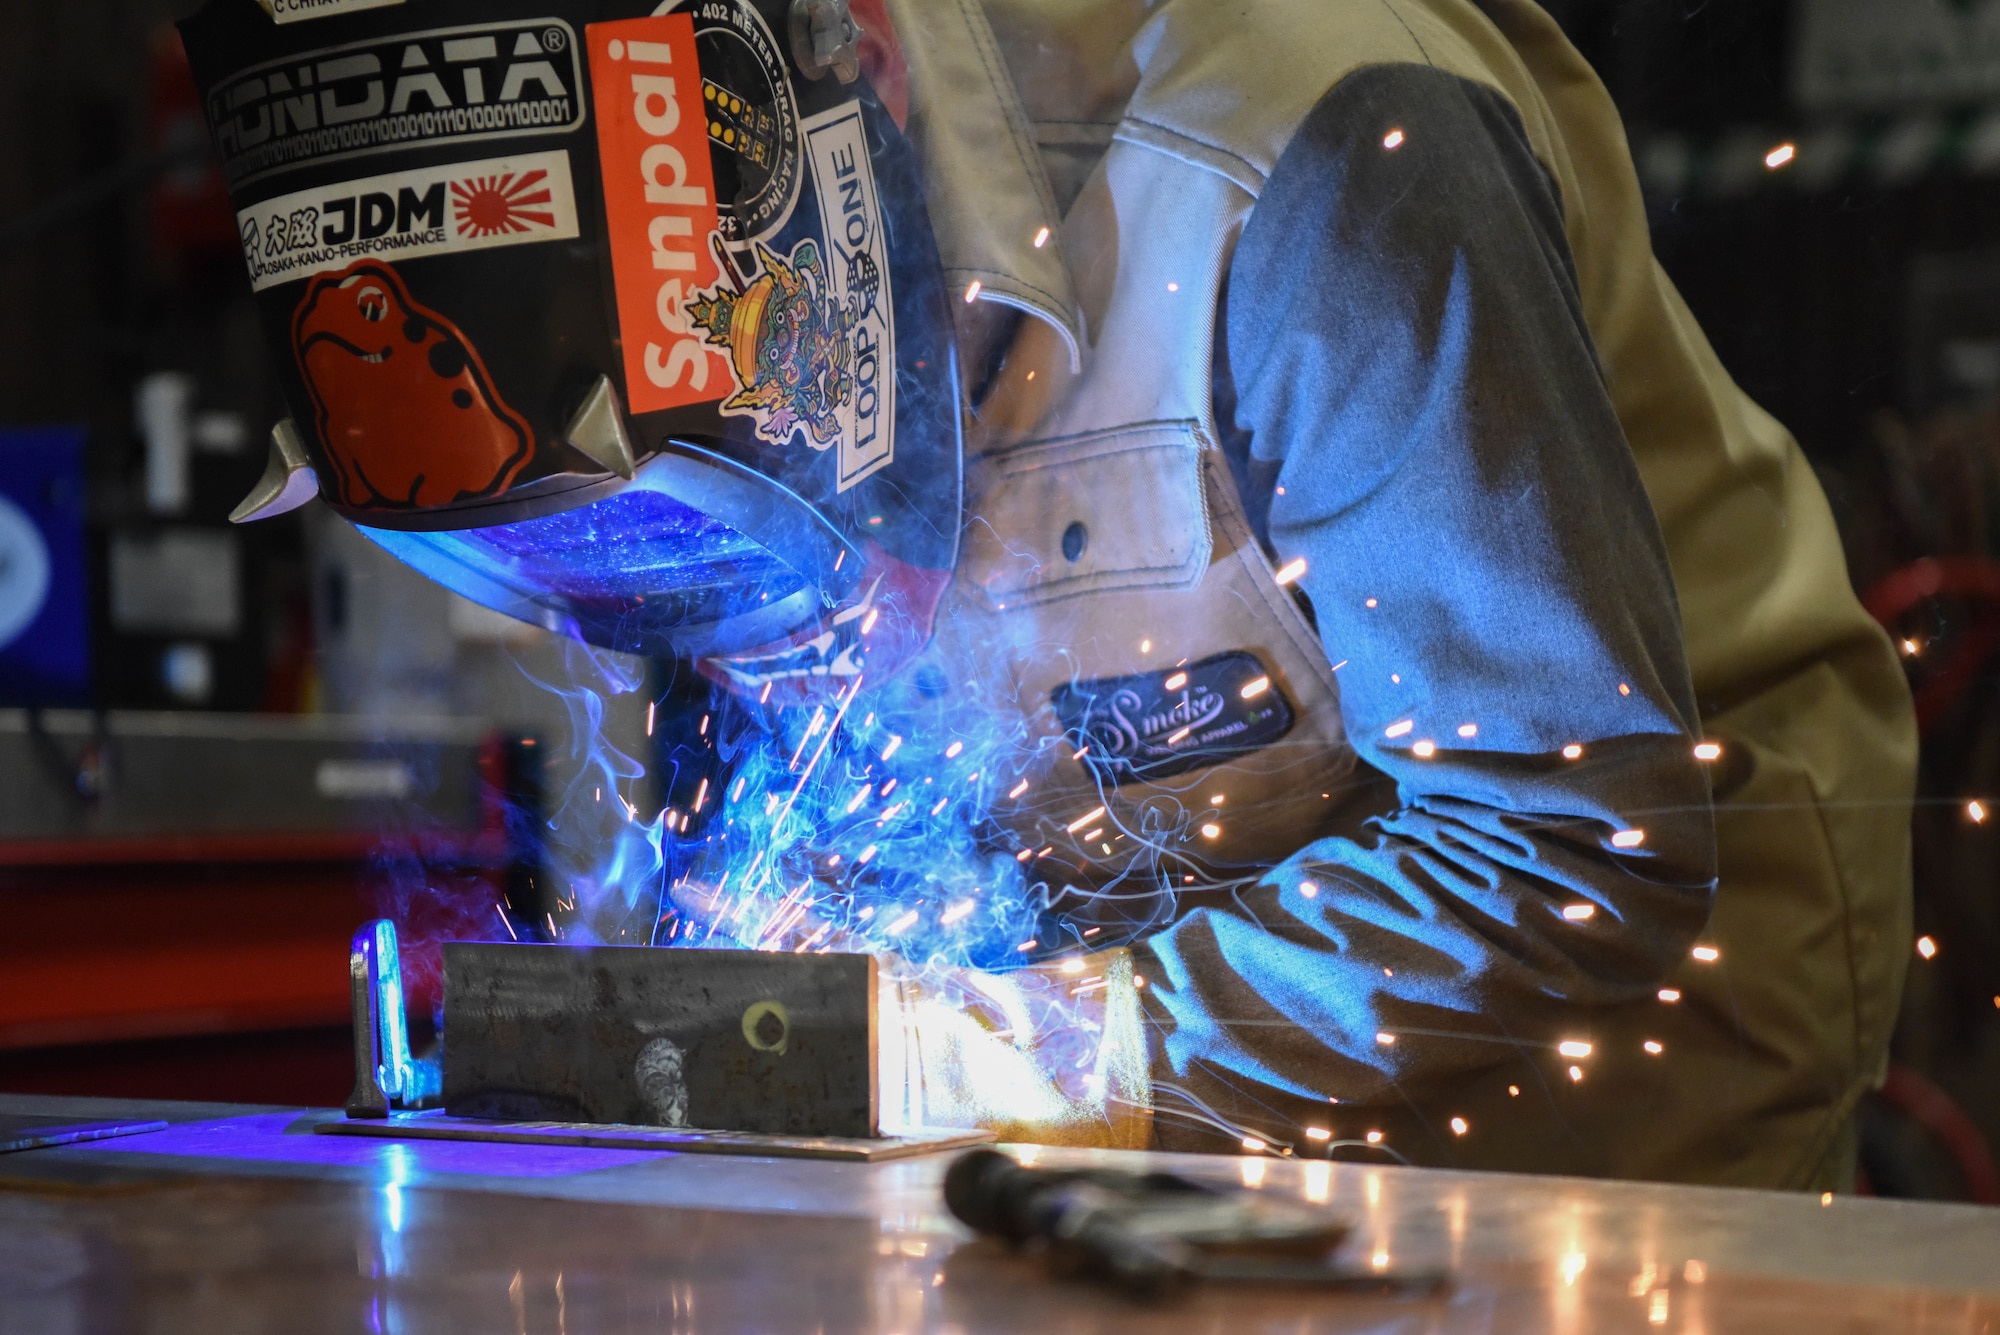 U.S. Air Force Staff Sgt. Clement Chhay, 51st Maintenance Squadron metals technology craftsman, practices welding a T-joint at Osan Air Base, Republic of Korea, Dec. 22, 2023. Metals technicians from the 51st MXS ensure aircraft components meet required specifications and standards, enabling the 51st Fighter Wing jets to fight anytime, anywhere. (U.S. Air Force photo by Senior Airman Brittany Russell)